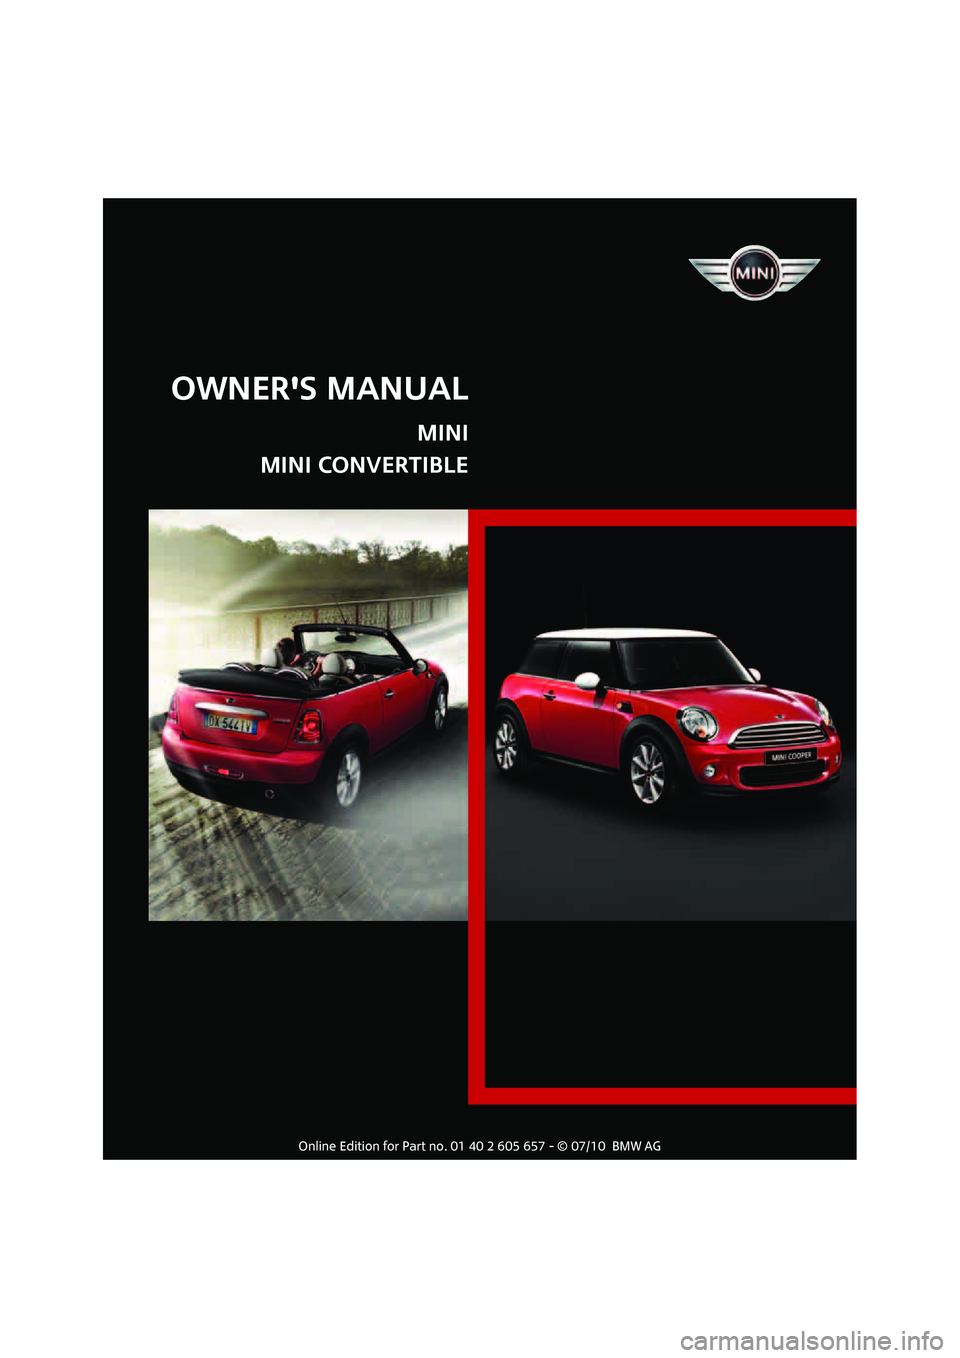 MINI COOPER CONVERTIBLE 2011  Owners Manual   
OWNERS MANUAL
MINI
MINI CONVERTIBLE 